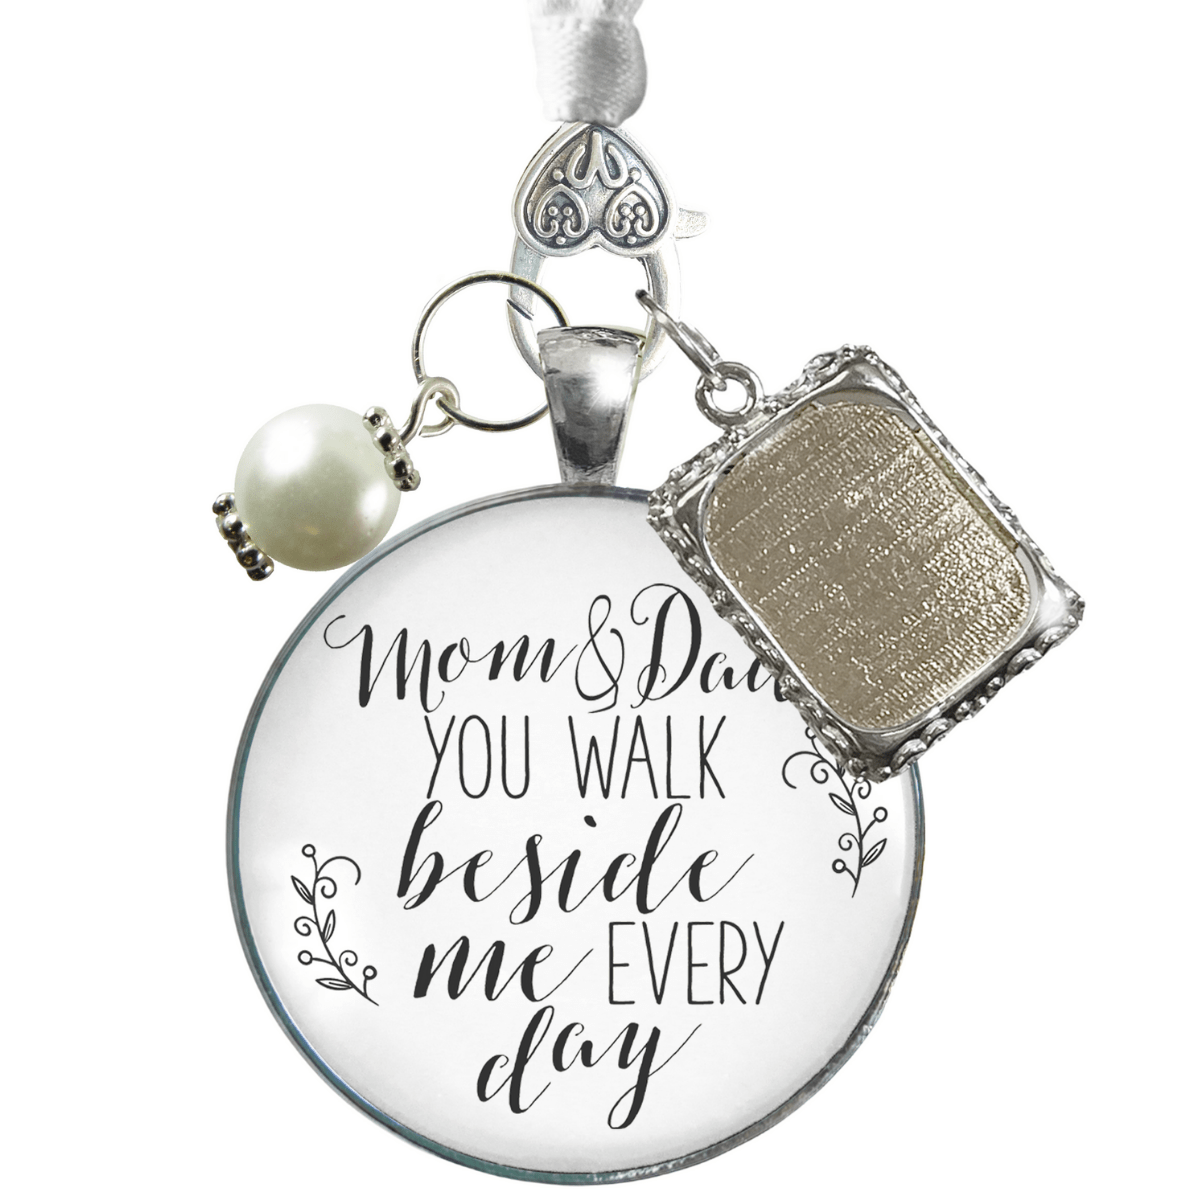 Bridal Bouquet Charm Mom Dad Bride Parents White Silver Finish Wedding Photo Jewels - Gutsy Goodness Handmade Jewelry Gifts